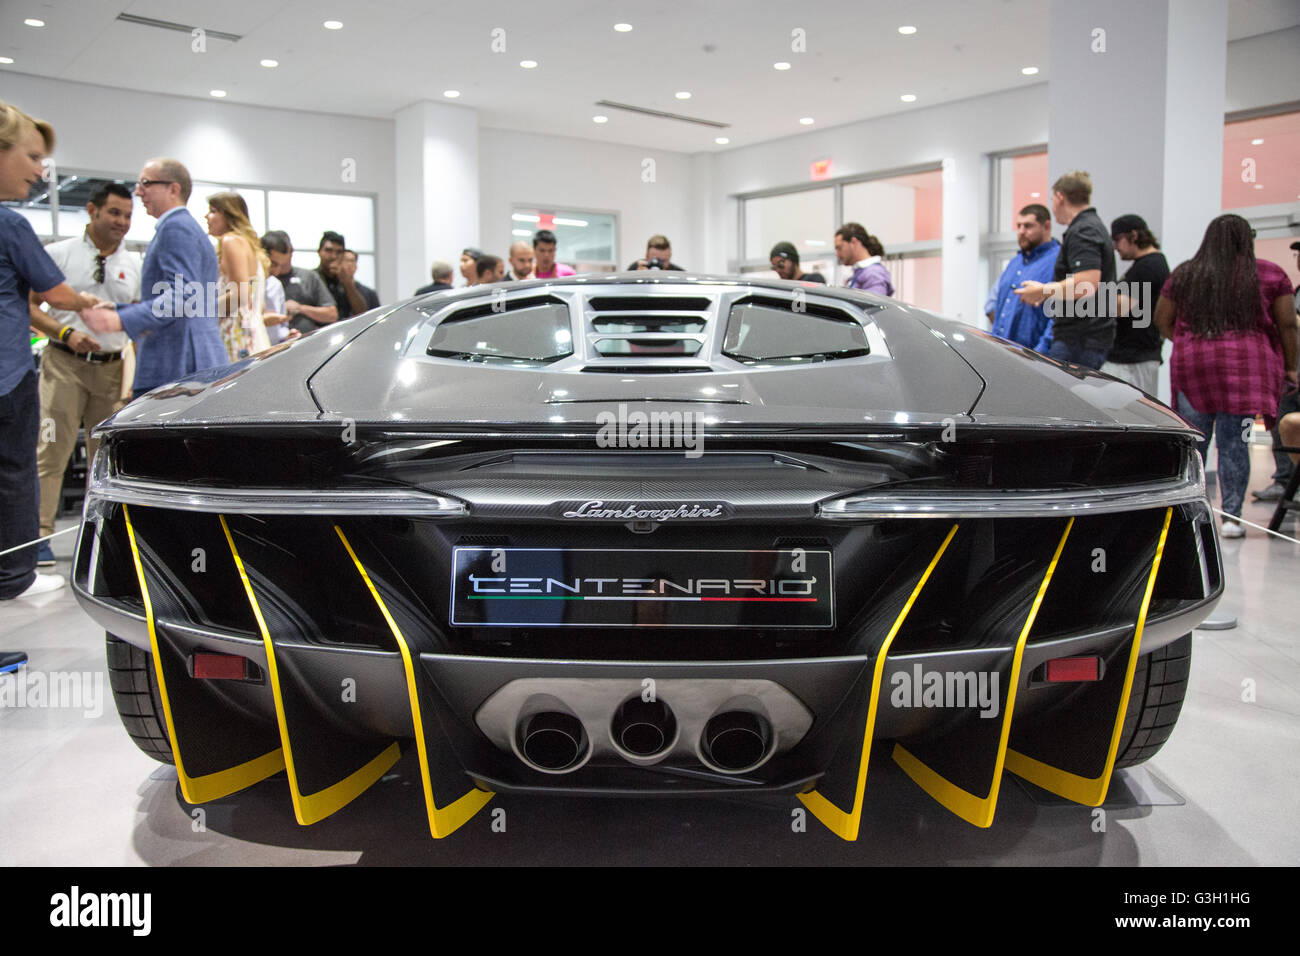 Los Angeles, California, USA. 11th June, 2016. Lamborghini presented its limited edition Centenario to the North American market at the Petersen Automotive Museum's 'Lamborghini Cruise-in' event in Los Angeles.  The Centenario features the most powerful engine that Lamborghini has ever manufactured at 770 horsepower and was commissioned in honor of what would have been Ferruccio Lamborghini’s 100th birthday. There will be 40 cars manufactured at a price of $2 million USD each.  Credit:  Sheri Determan / Alamy Live News Stock Photo